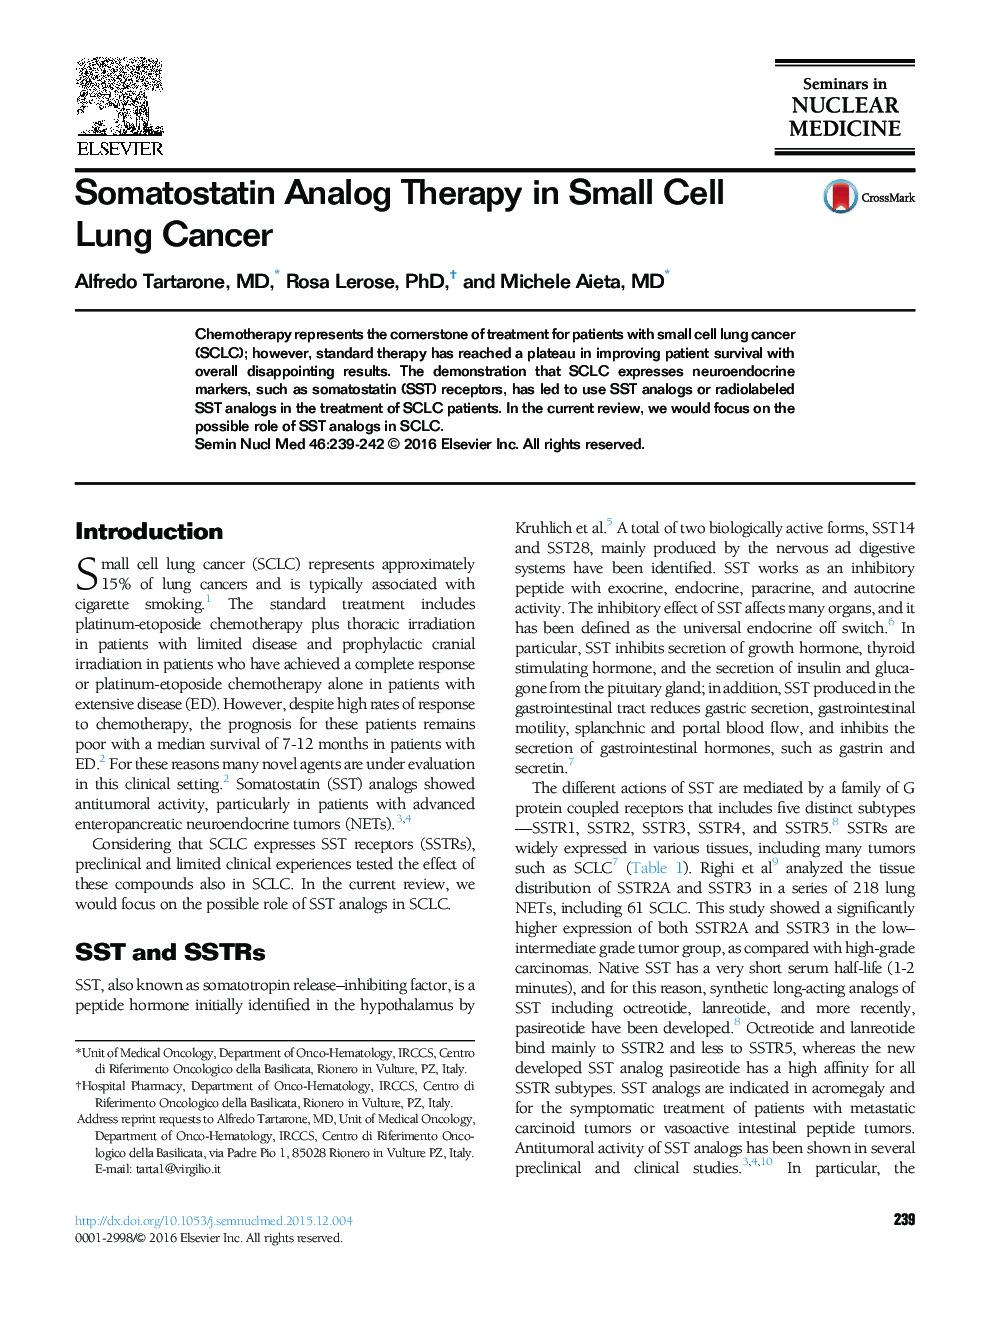 Somatostatin Analog Therapy in Small Cell Lung Cancer